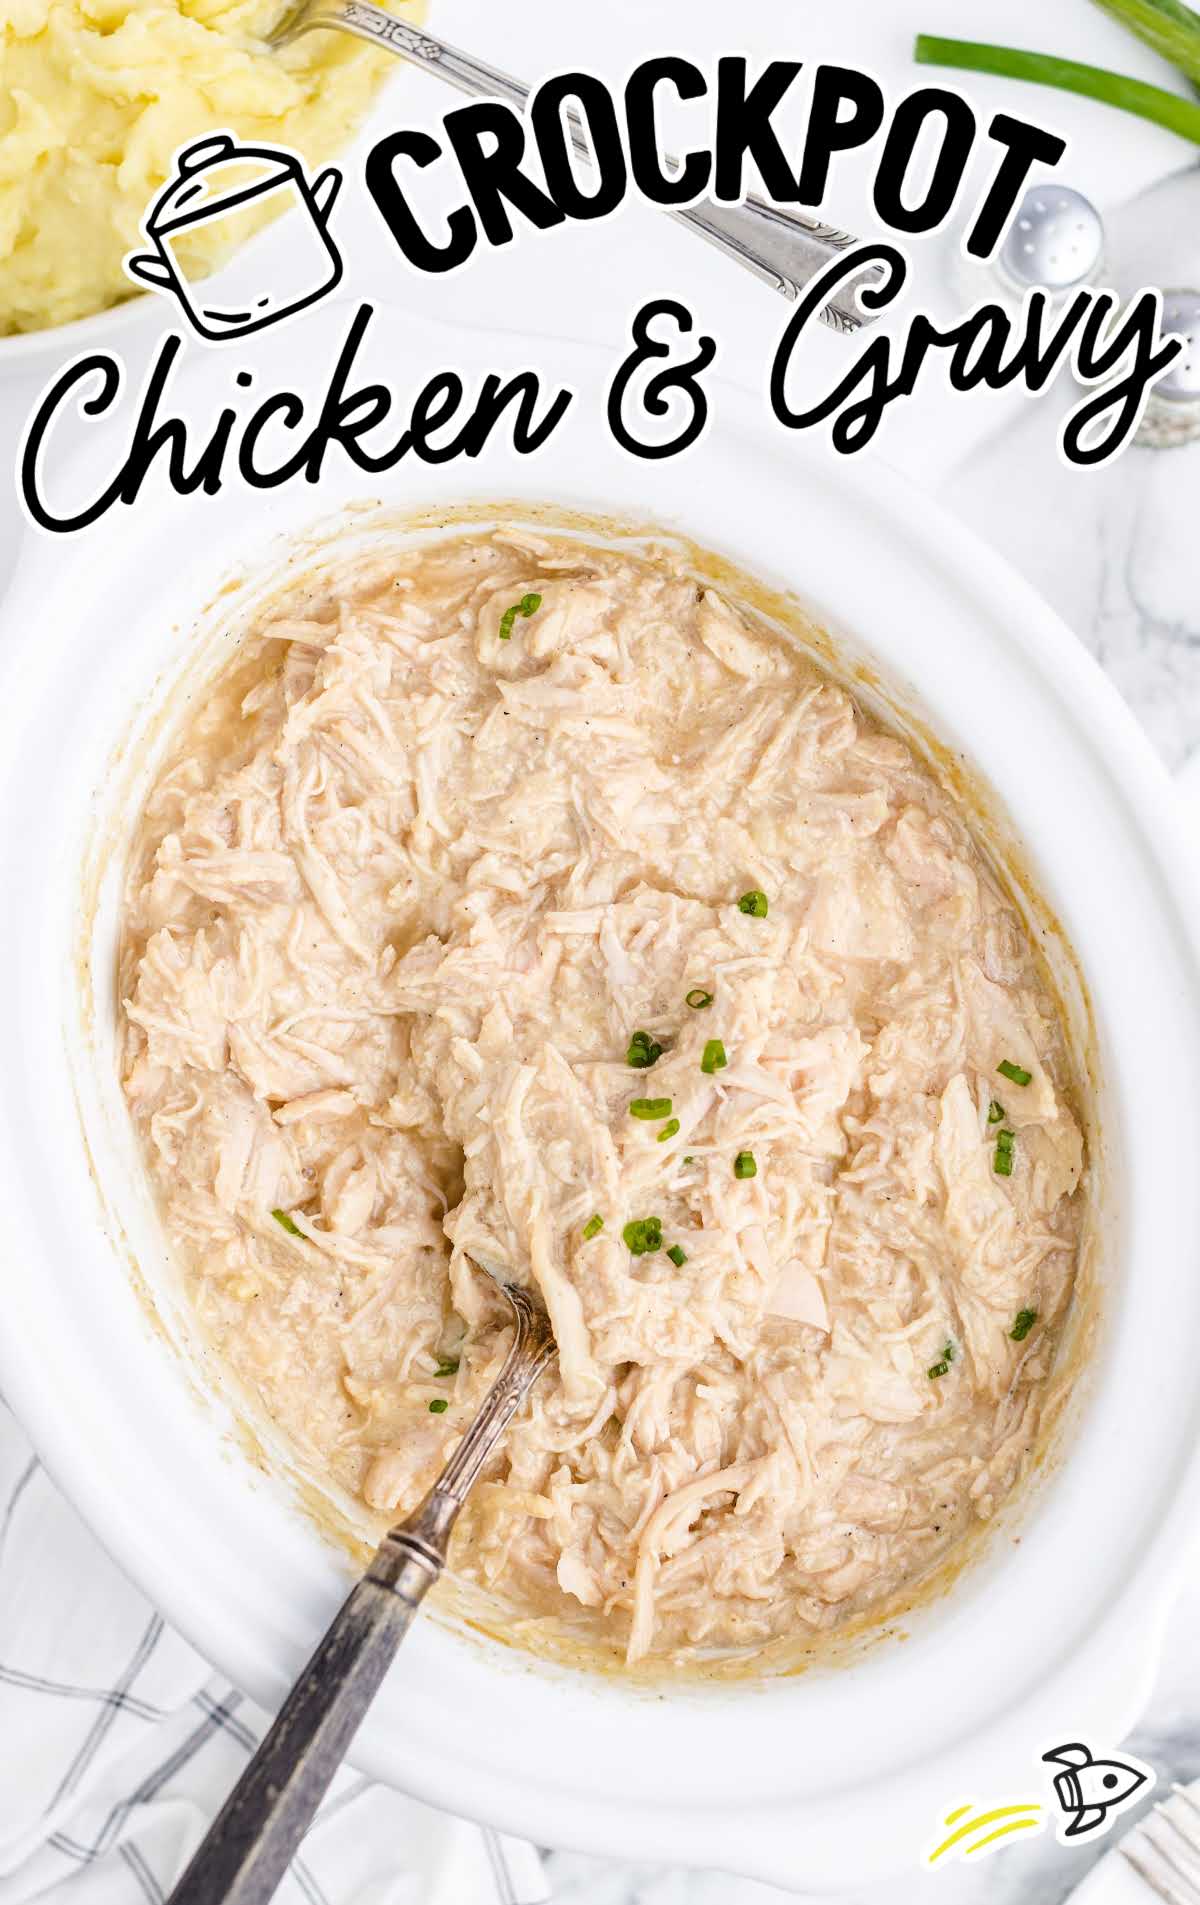 overhead shot of a crockpot full of chicken and gravy garnished with green onions